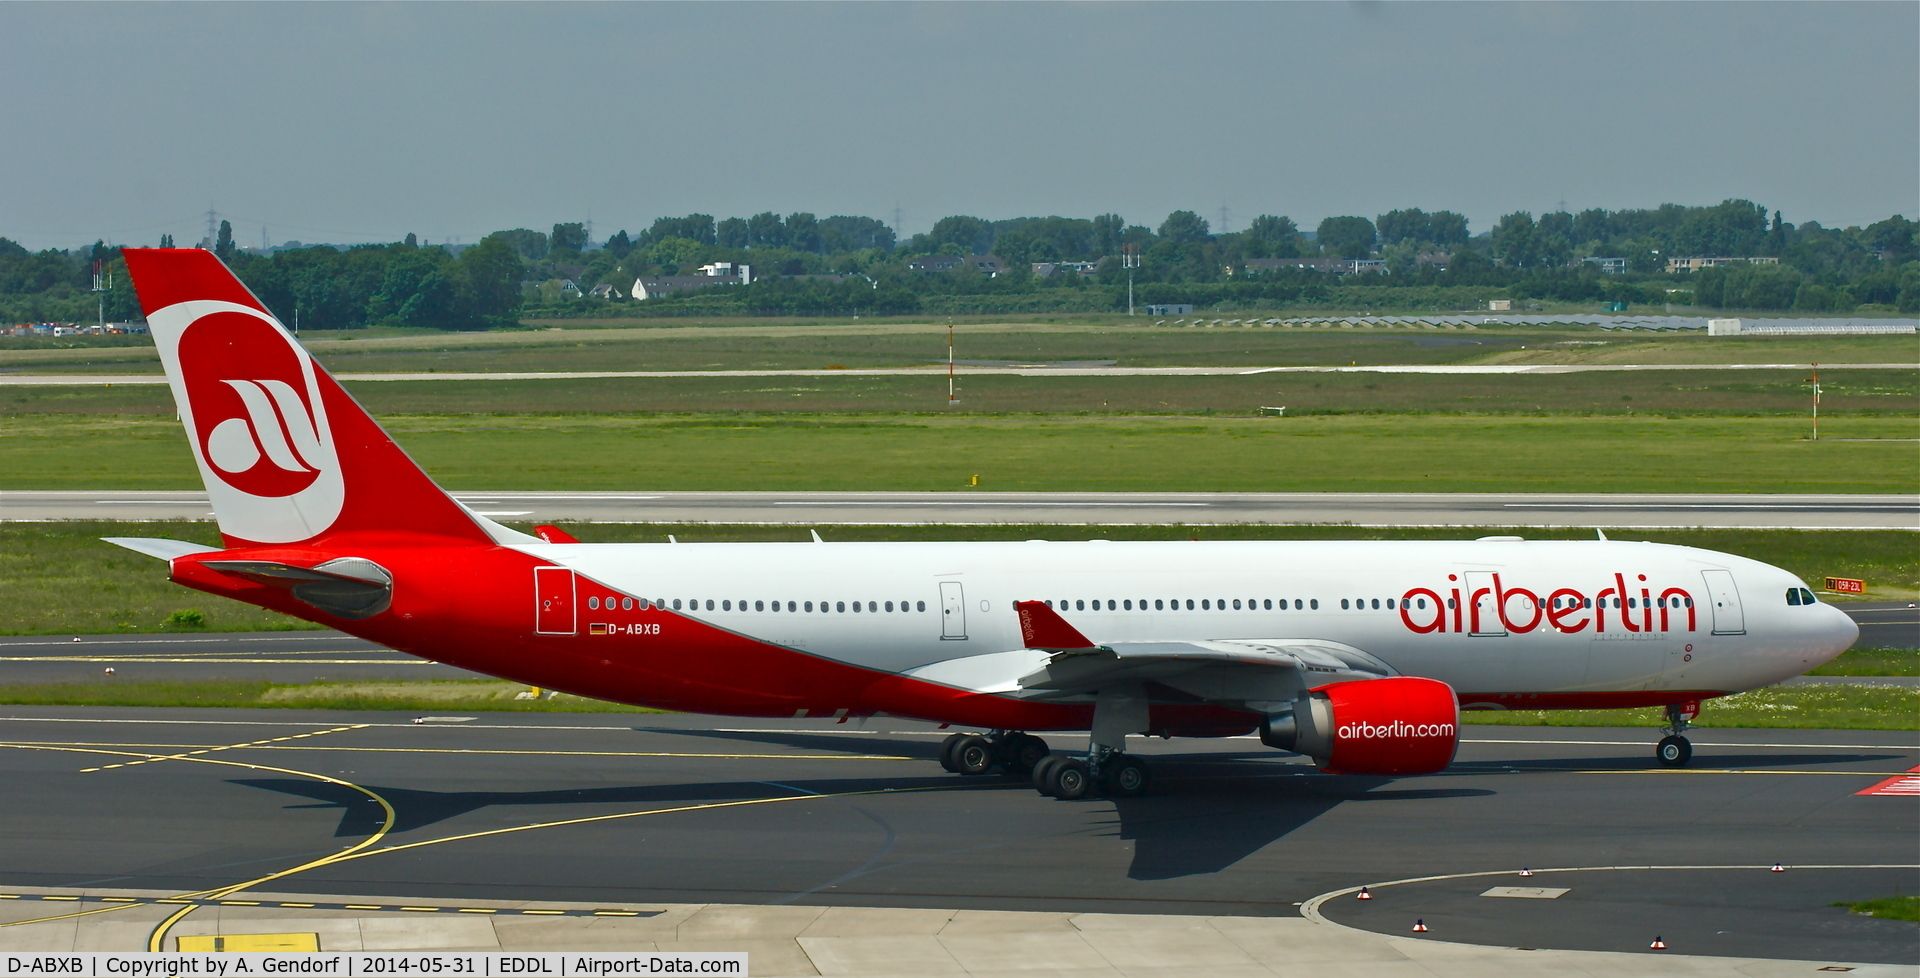 D-ABXB, 2000 Airbus A330-223 C/N 322, Air Berlin, is here taxiing to the RWY at Düsseldorf Int'l(EDDL), bound for New York JFK(KJFK)